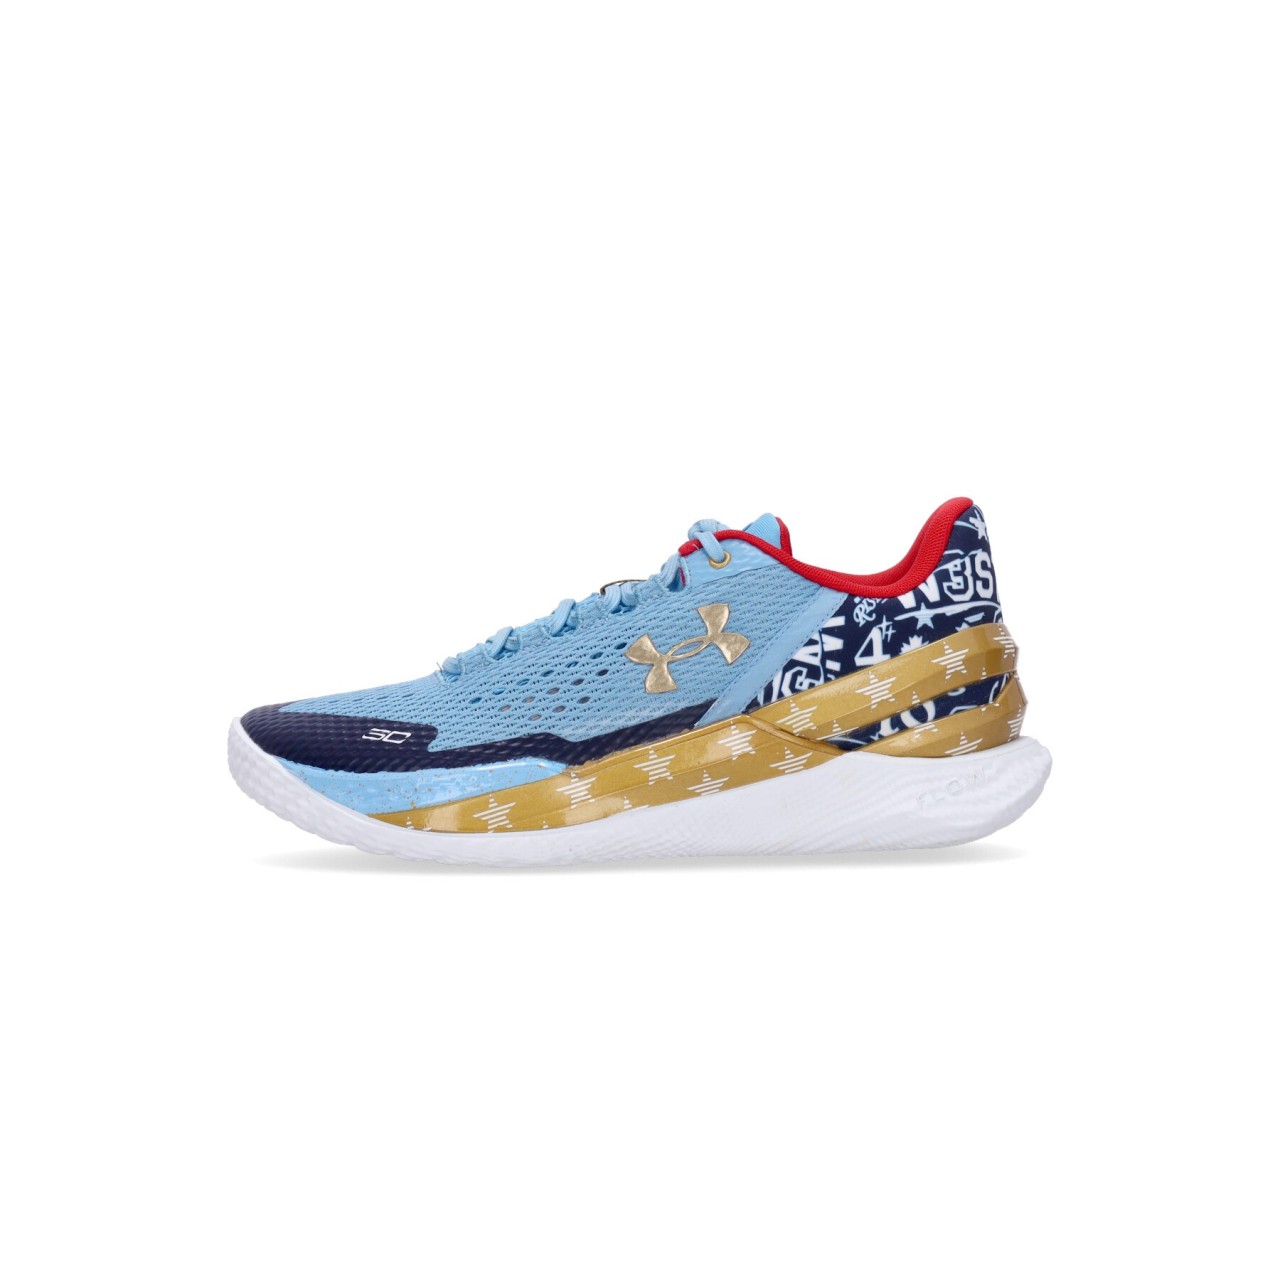 UNDER ARMOUR CURRY 2 LOW FLOTRO 3026276-402